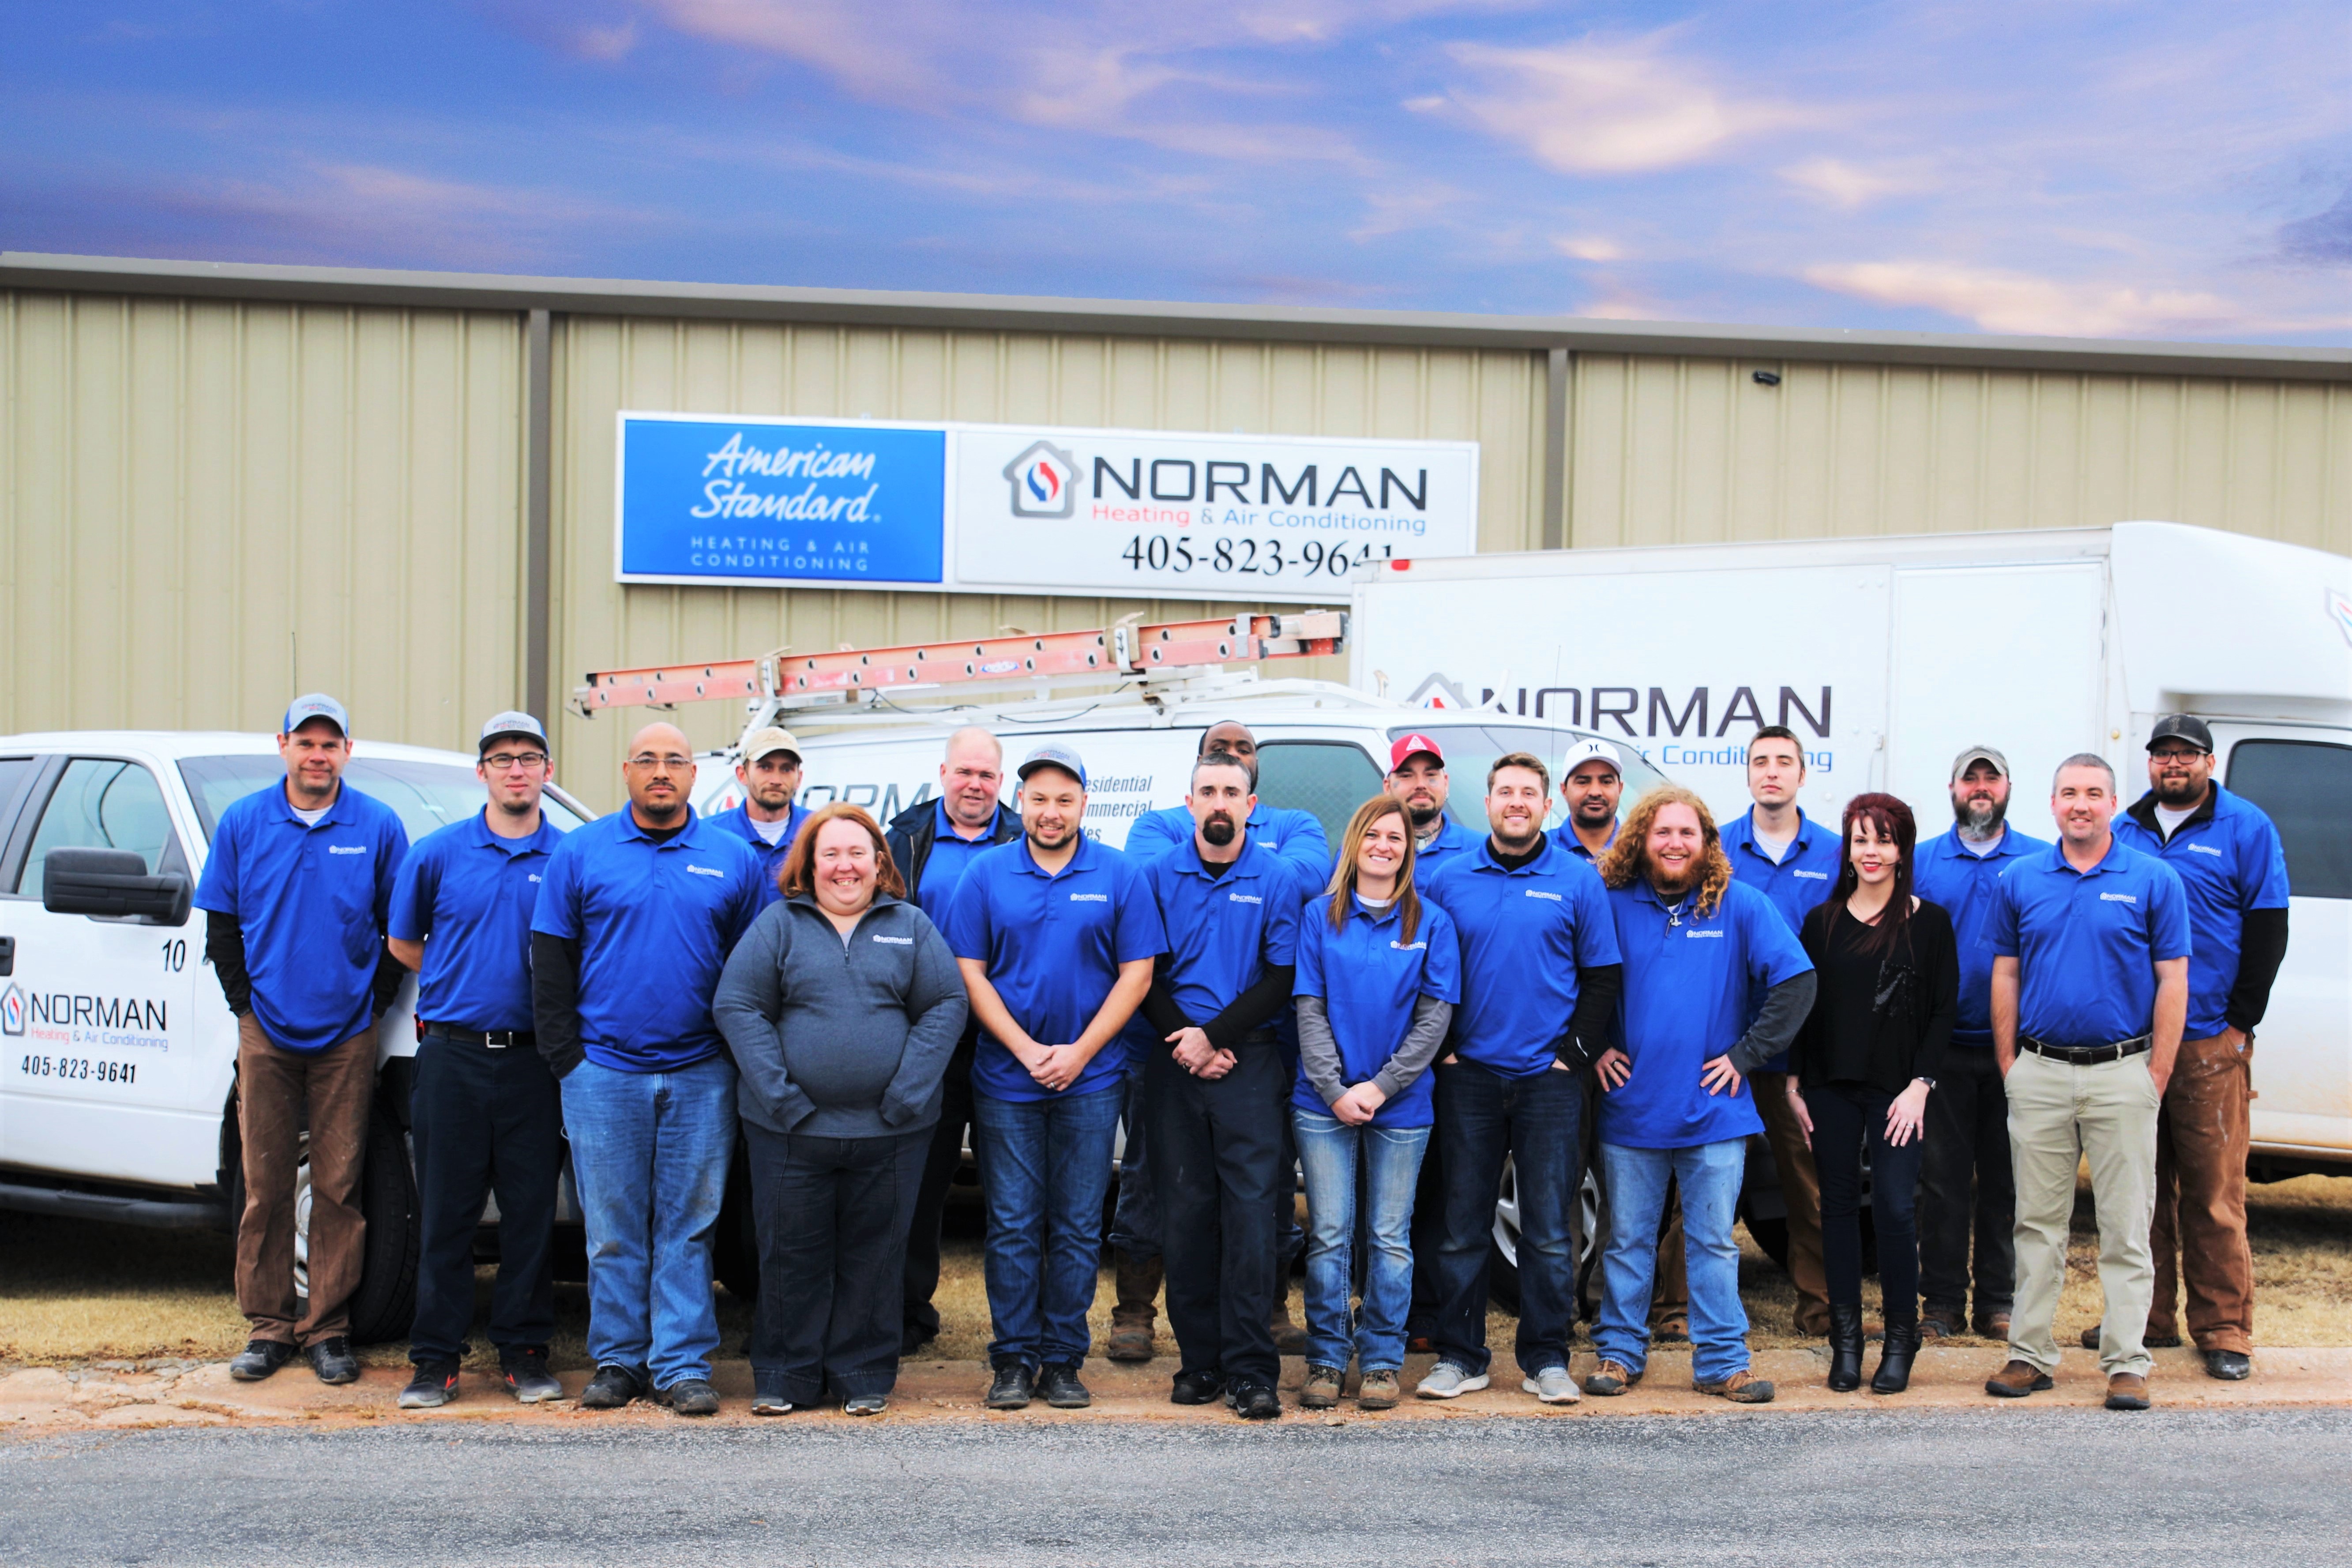 Norman Heating & Air Conditioning Photo